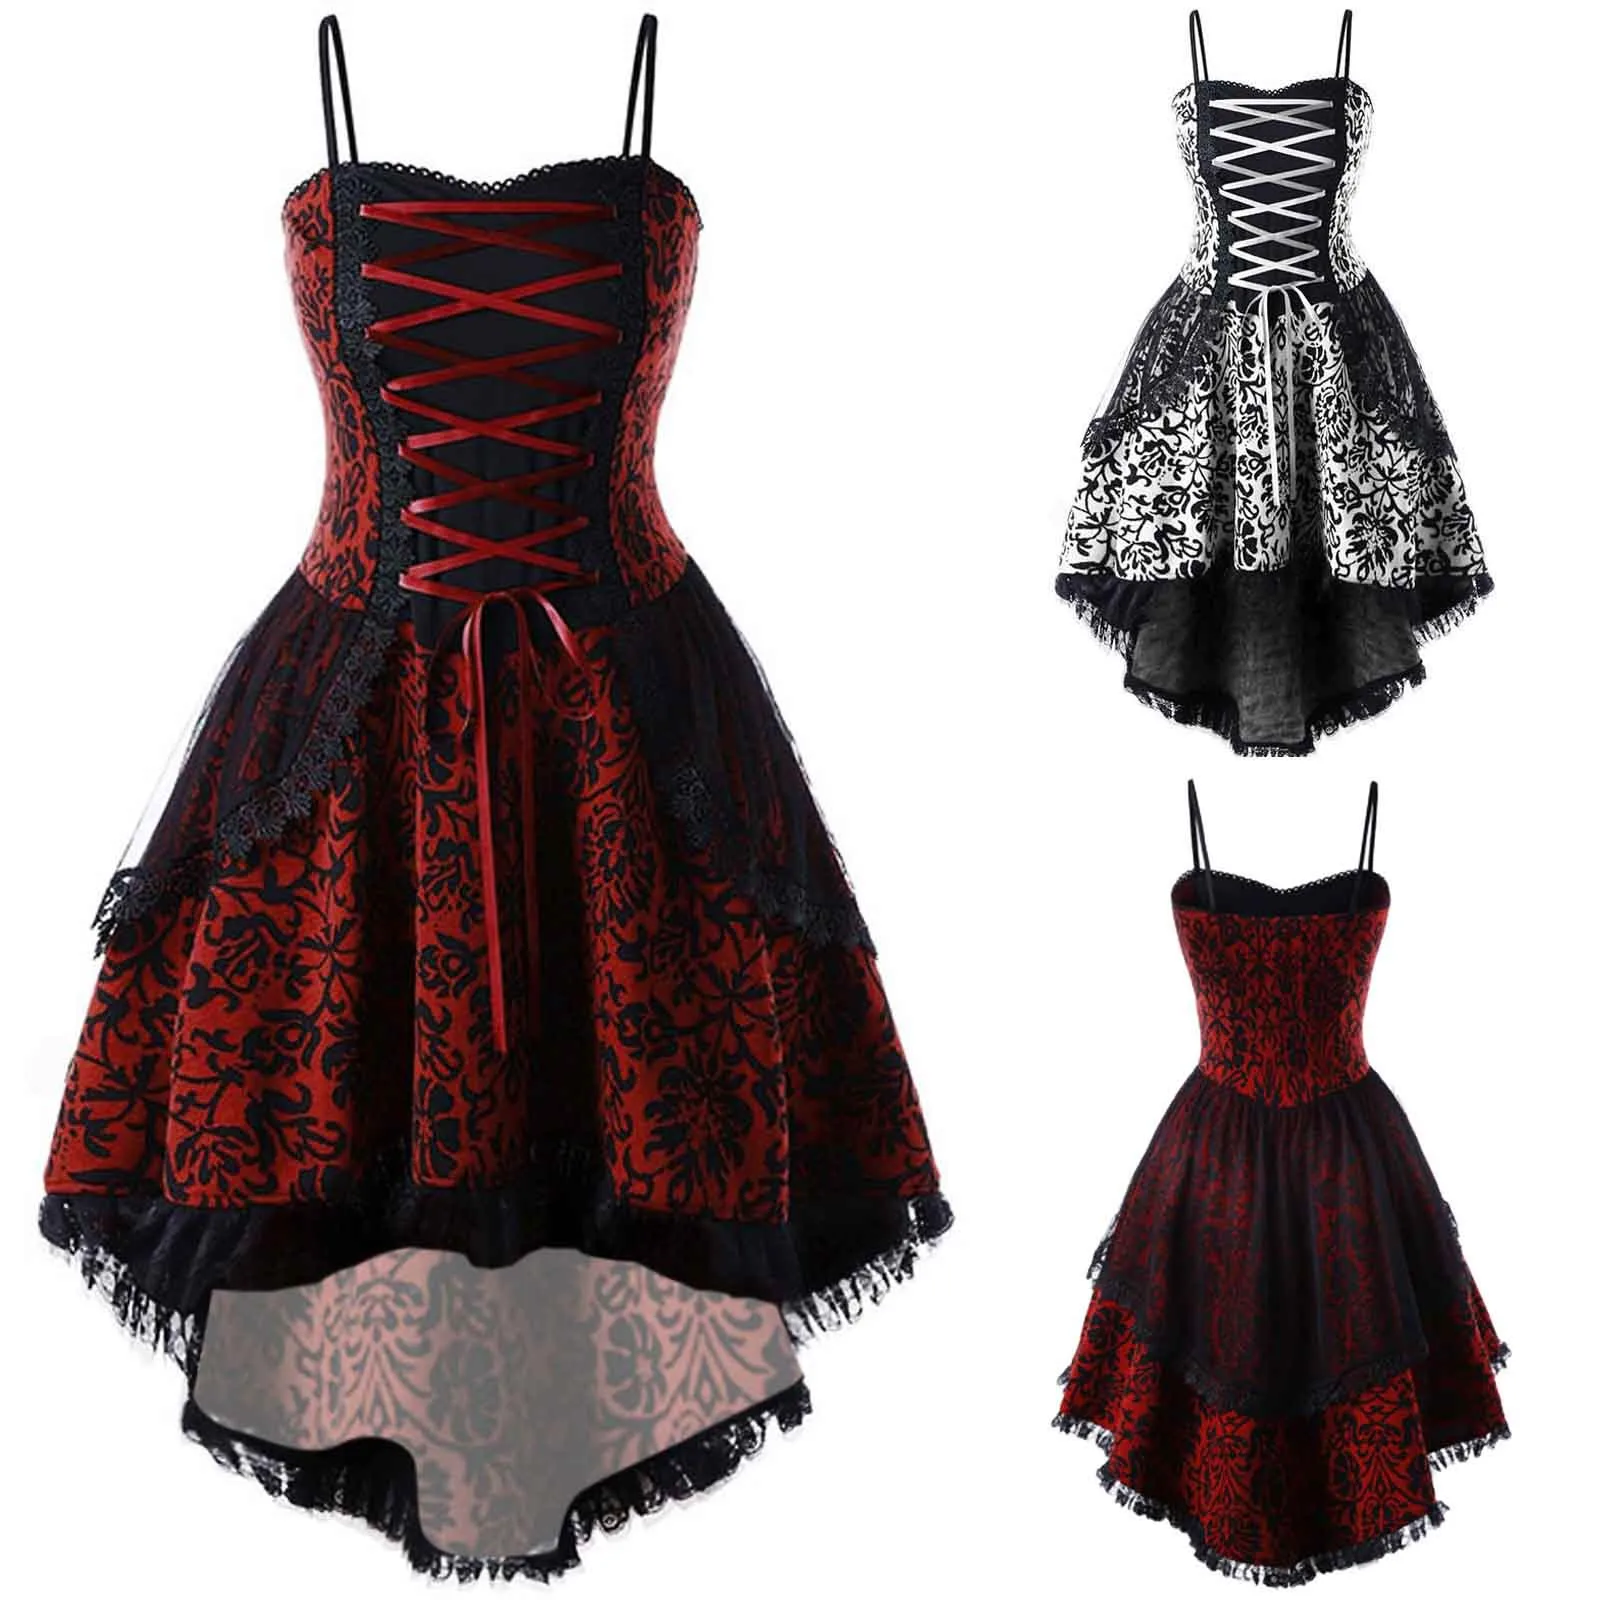 Lace Gothic Vintage Dress Women Halloween Cosplay Costume Irregular Sleeve Dresses Robe Medieval Ghost Vampire Clothing